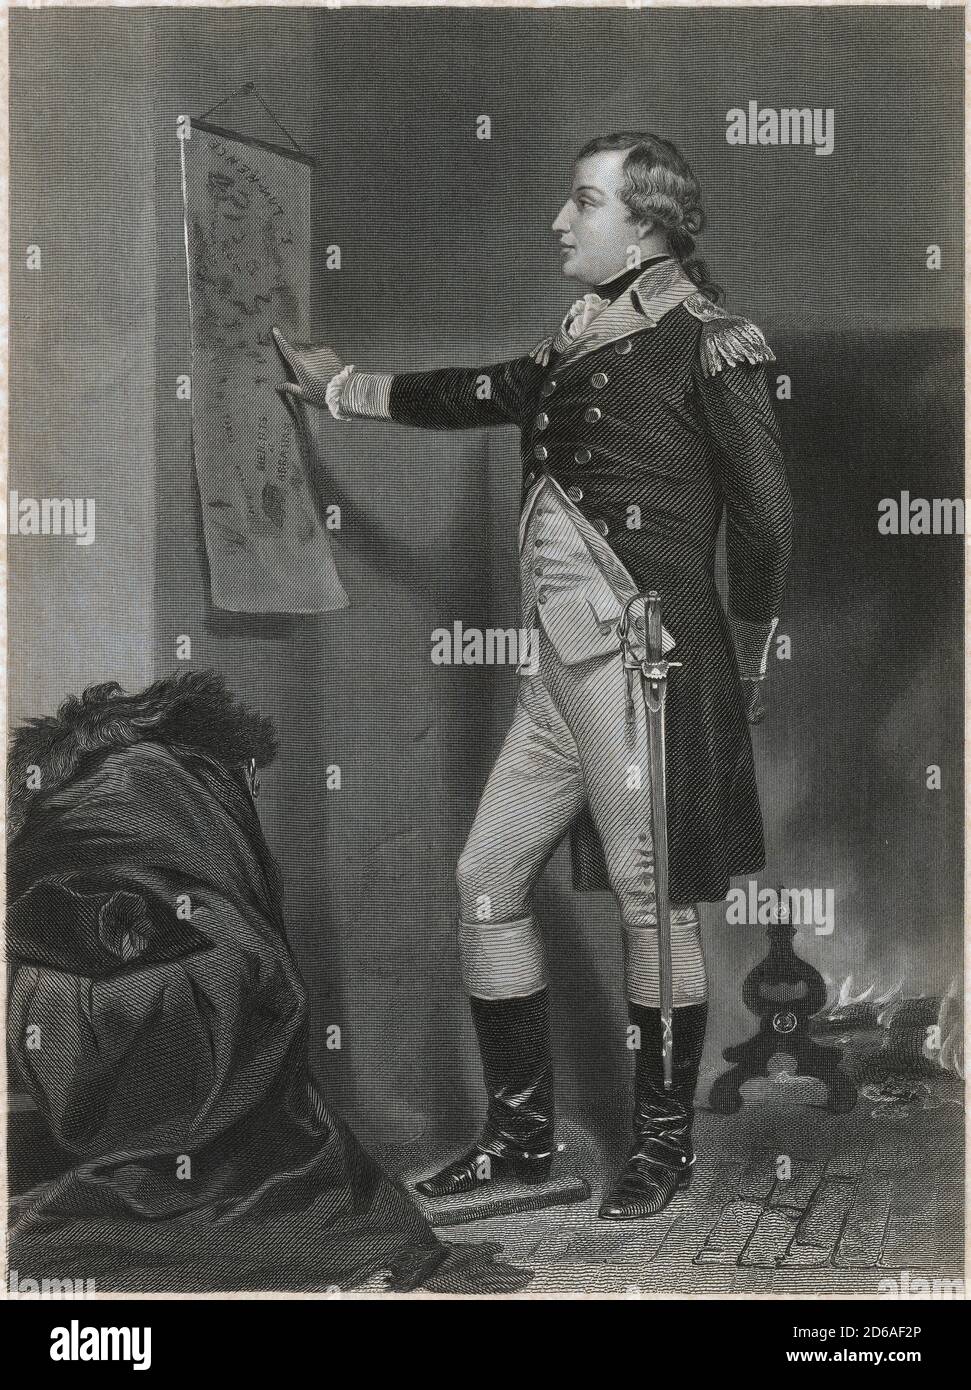 Antique c1870 engraving, Richard Montgomery. Richard Montgomery (1738-1775) was an Irish soldier who first served in the British Army. He later became a major general in the Continental Army during the American Revolutionary War. SOURCE: ORIGINAL ENGRAVING Stock Photo